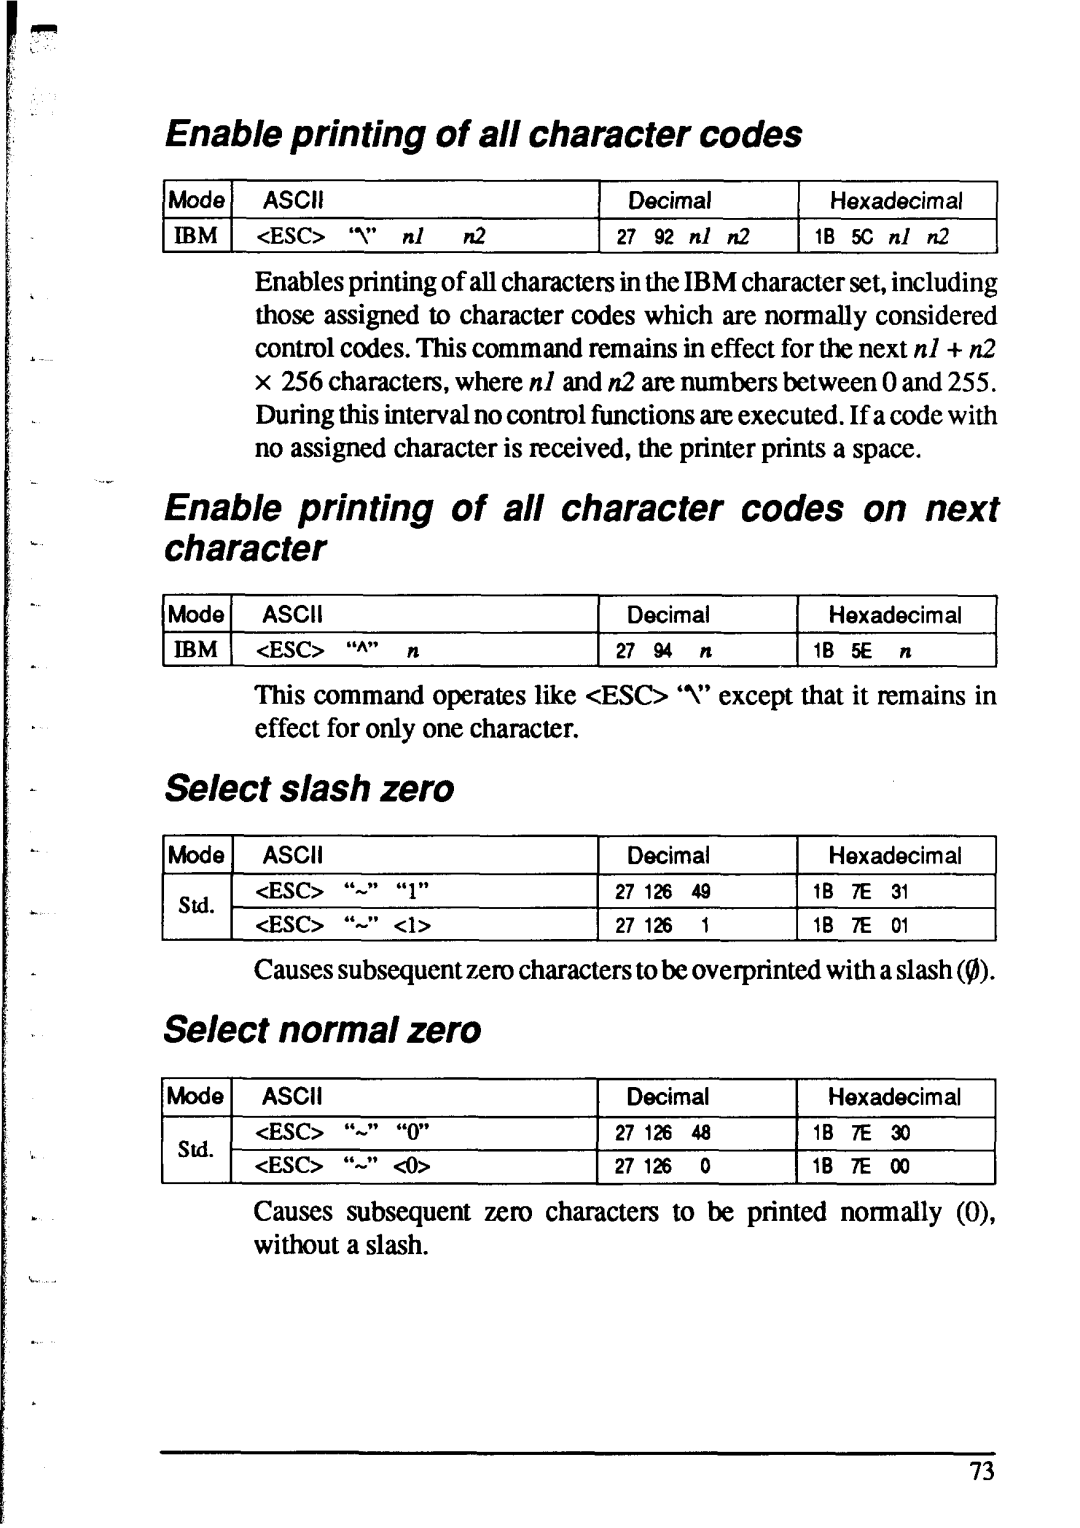 Star Micronics XR-1520, XR-1020 Enable printing of all character codes on next, Select slash zero, Select normal zero 